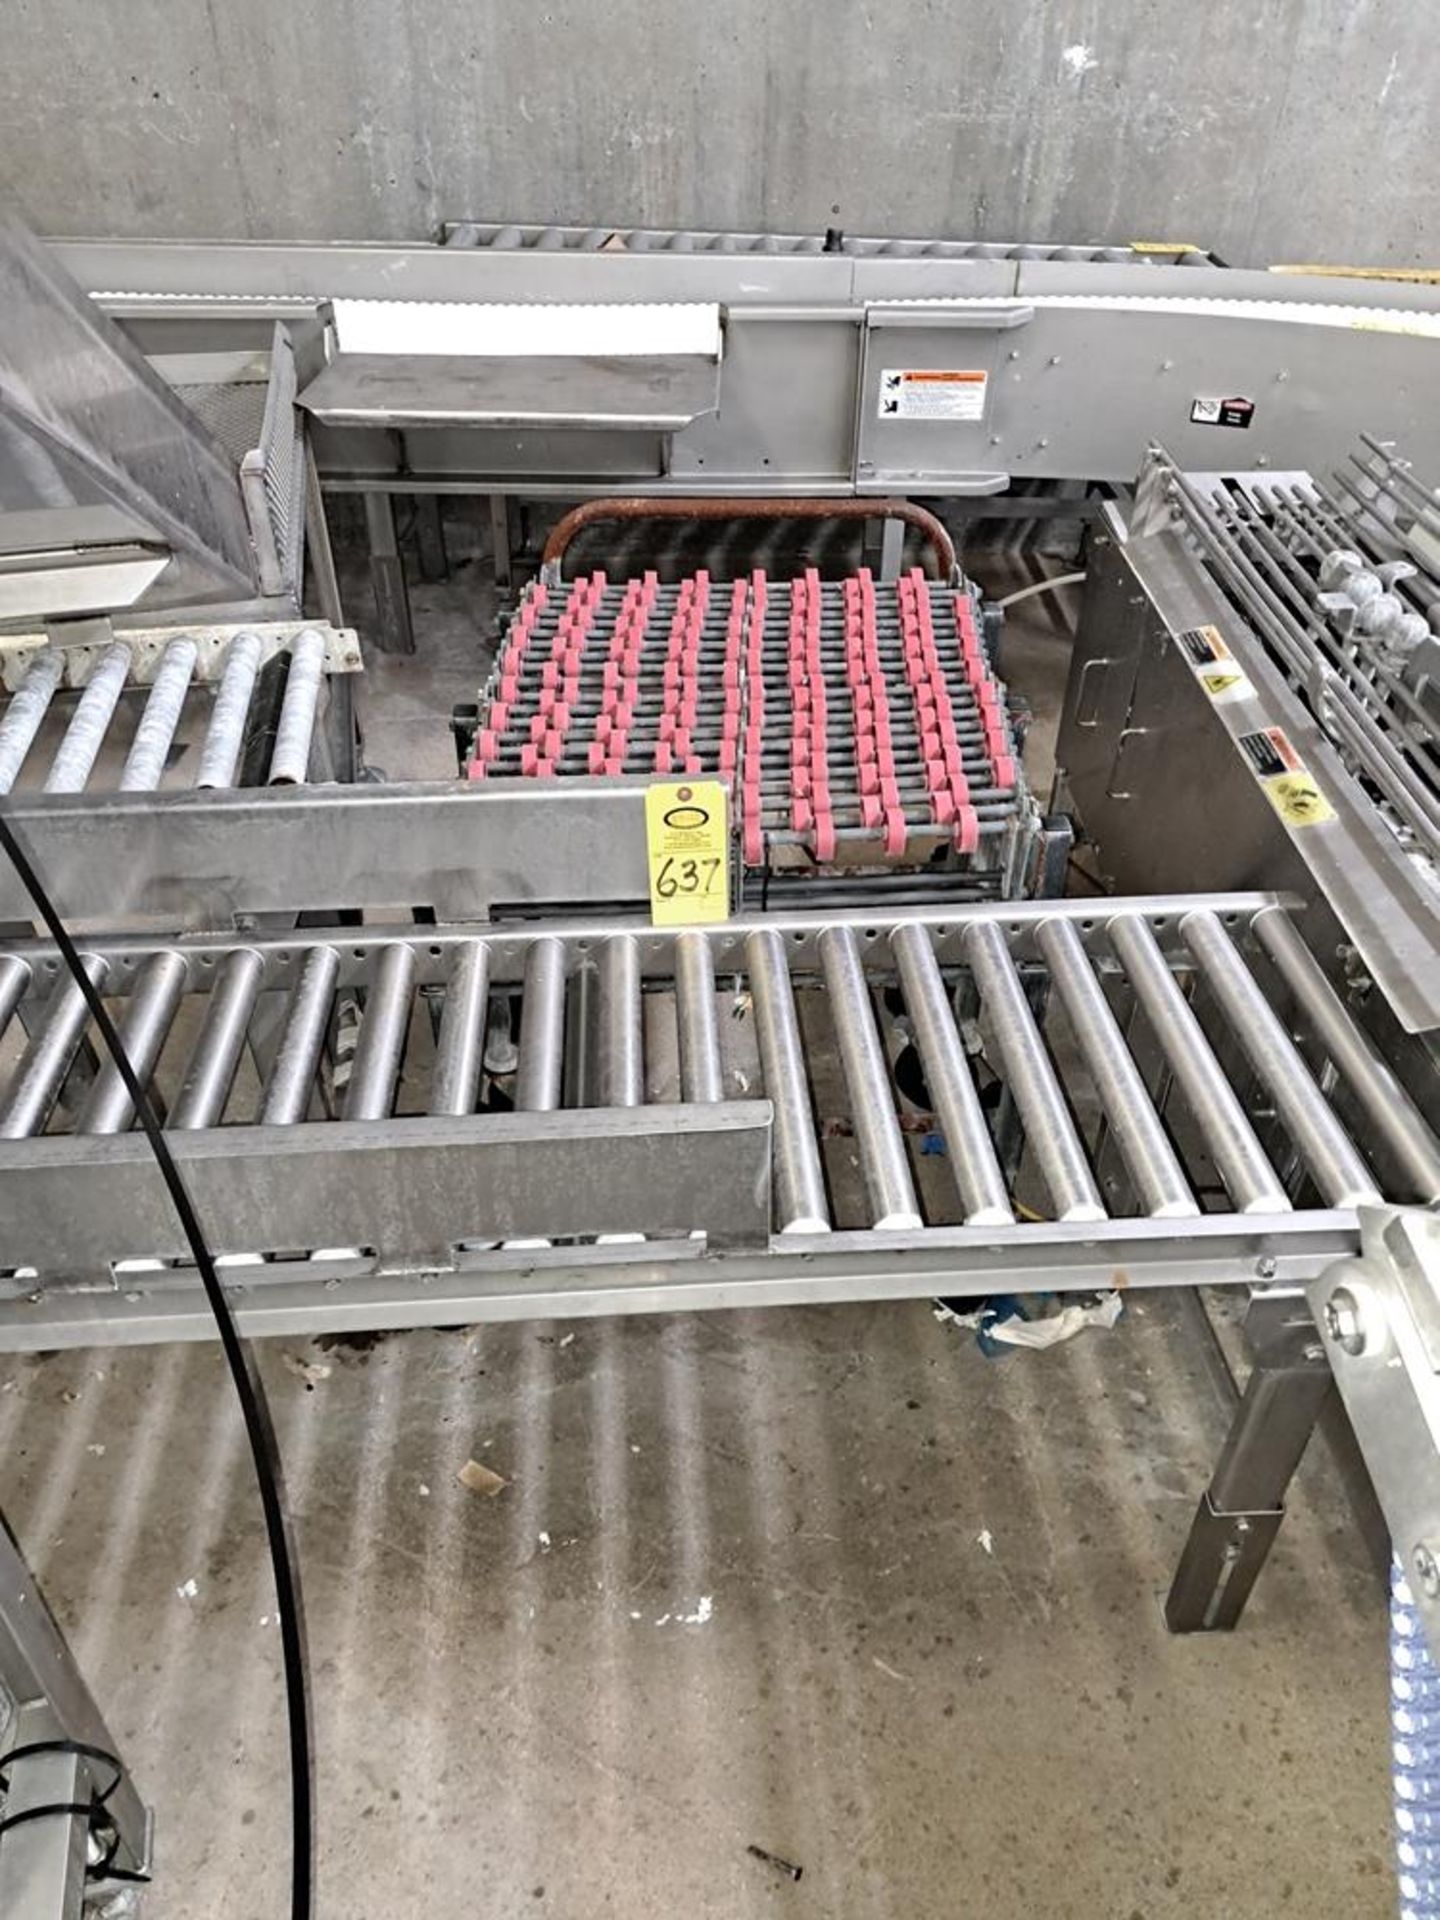 Lot Roller Conveyor, Stainless Steel Processing Bins with chutes, Stainless Steel Platform, - Image 5 of 7